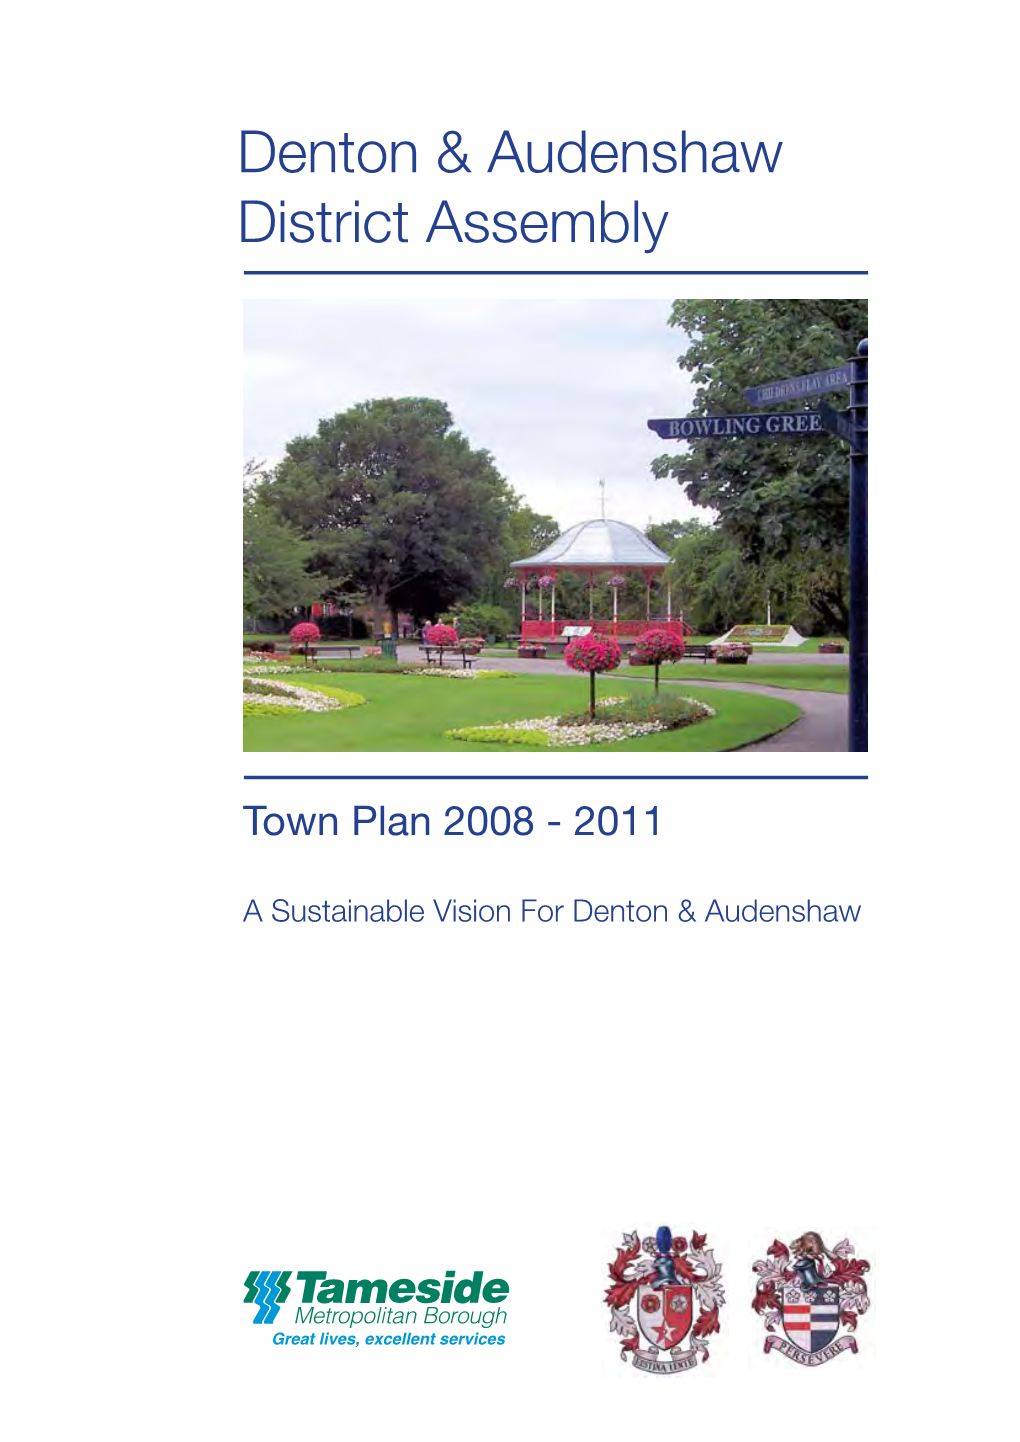 Denton and Audenshaw District Assembly Town Plan 2008-2011 and I Am Proud to Be Appointed and Represent the Assembly As the Chair